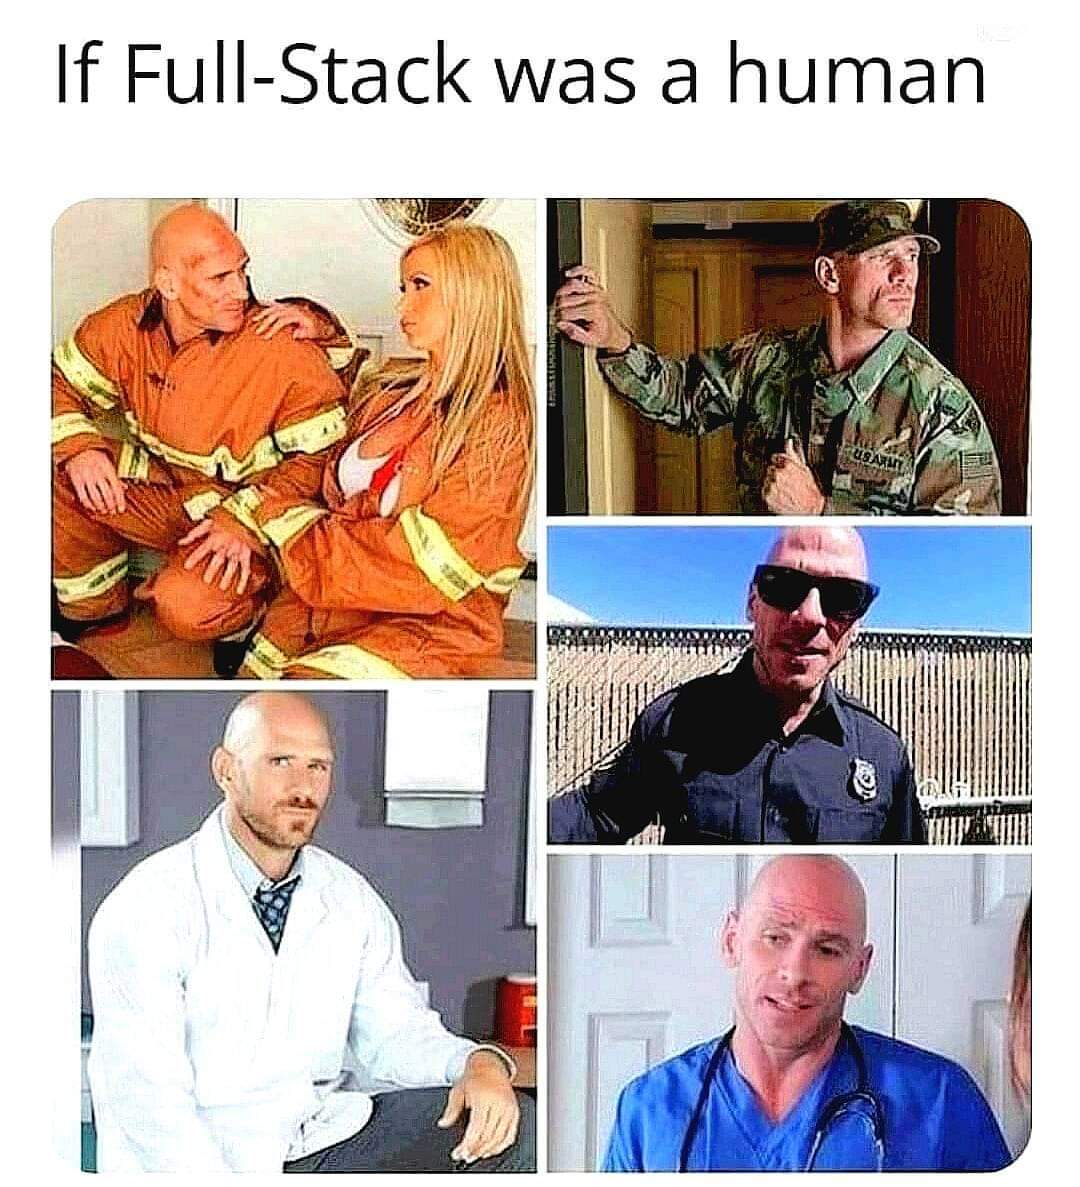 if_full-stack_was_a_human.jpg